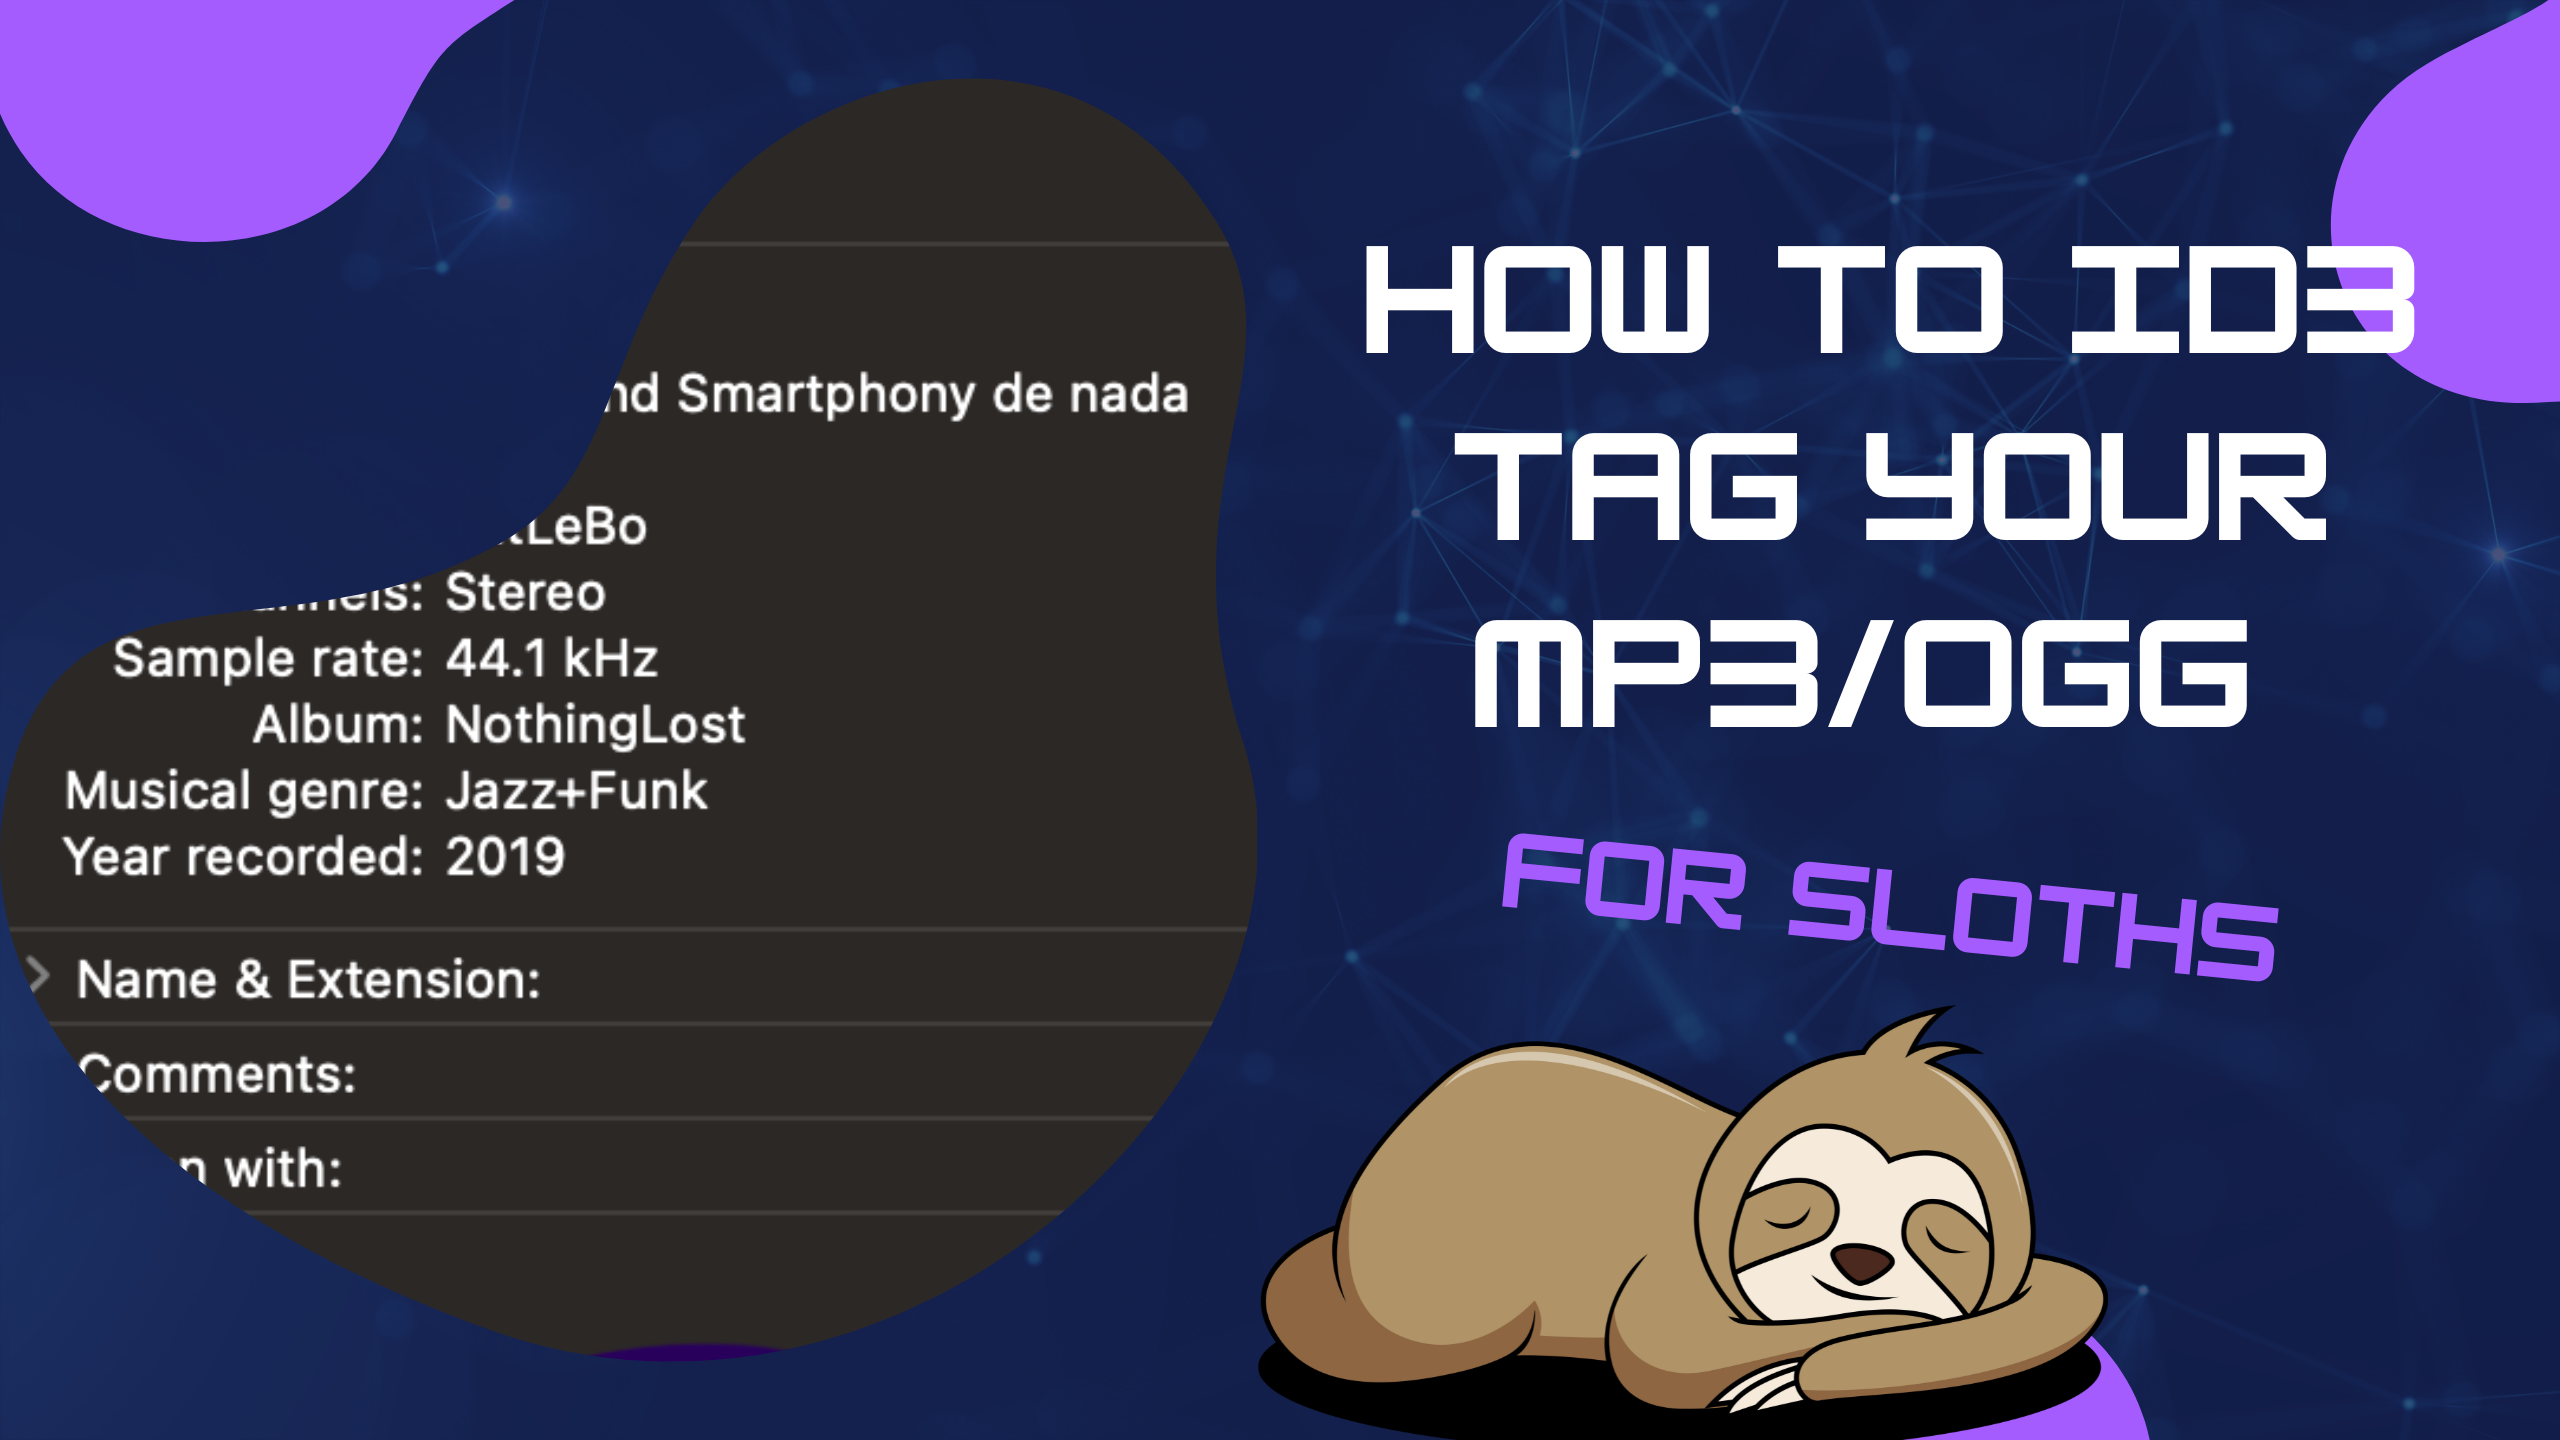 How to ID3 tag you music, for Sloths